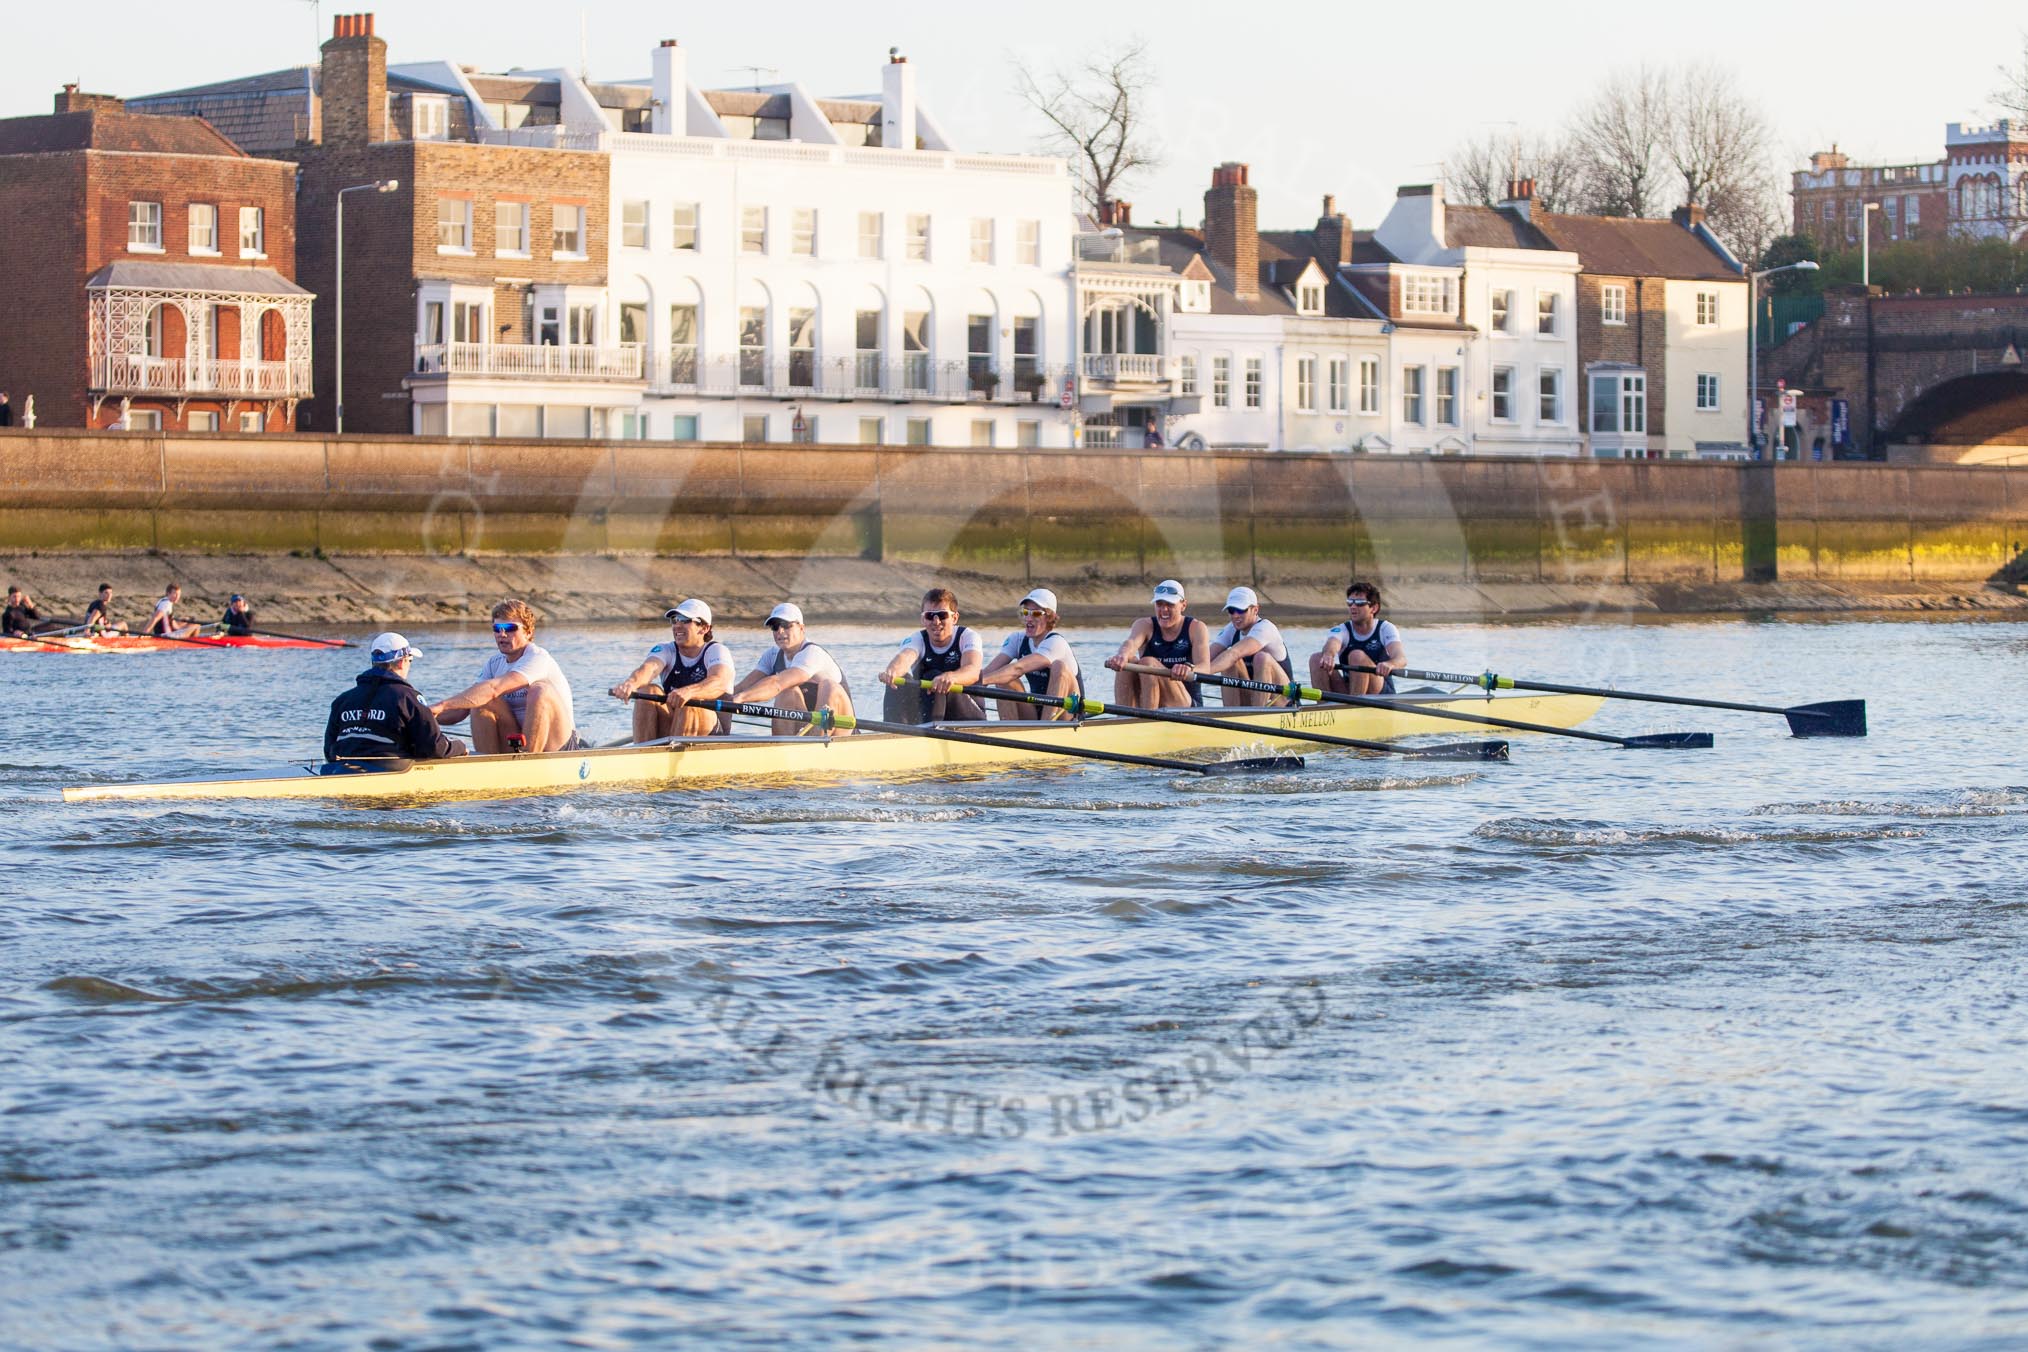 The Boat Race season 2014 - fixture OUBC vs German U23: The OUBC boat during the second race, approaching Barnes Railway Bridge..
River Thames between Putney Bridge and Chiswick Bridge,



on 08 March 2014 at 17:07, image #235